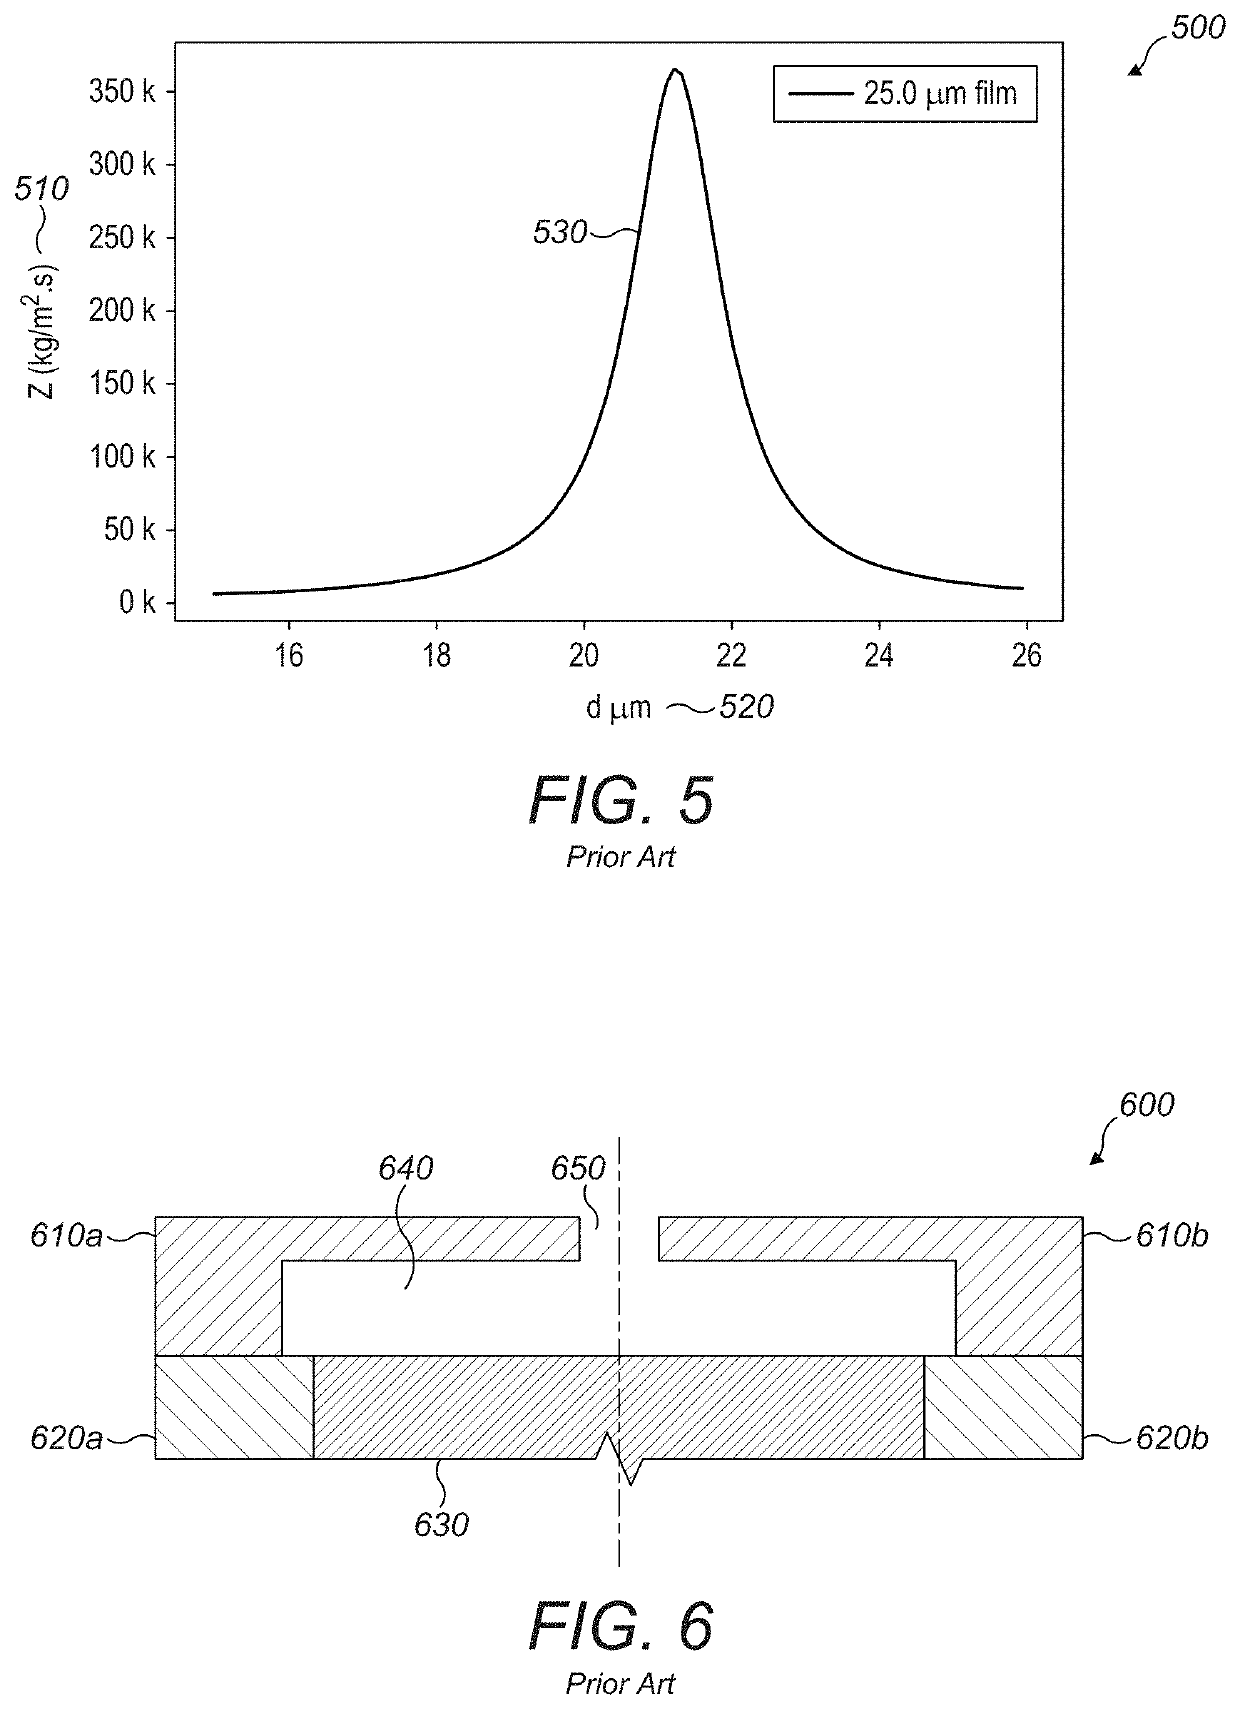 Blocking plate structure for improved acoustic transmission efficiency